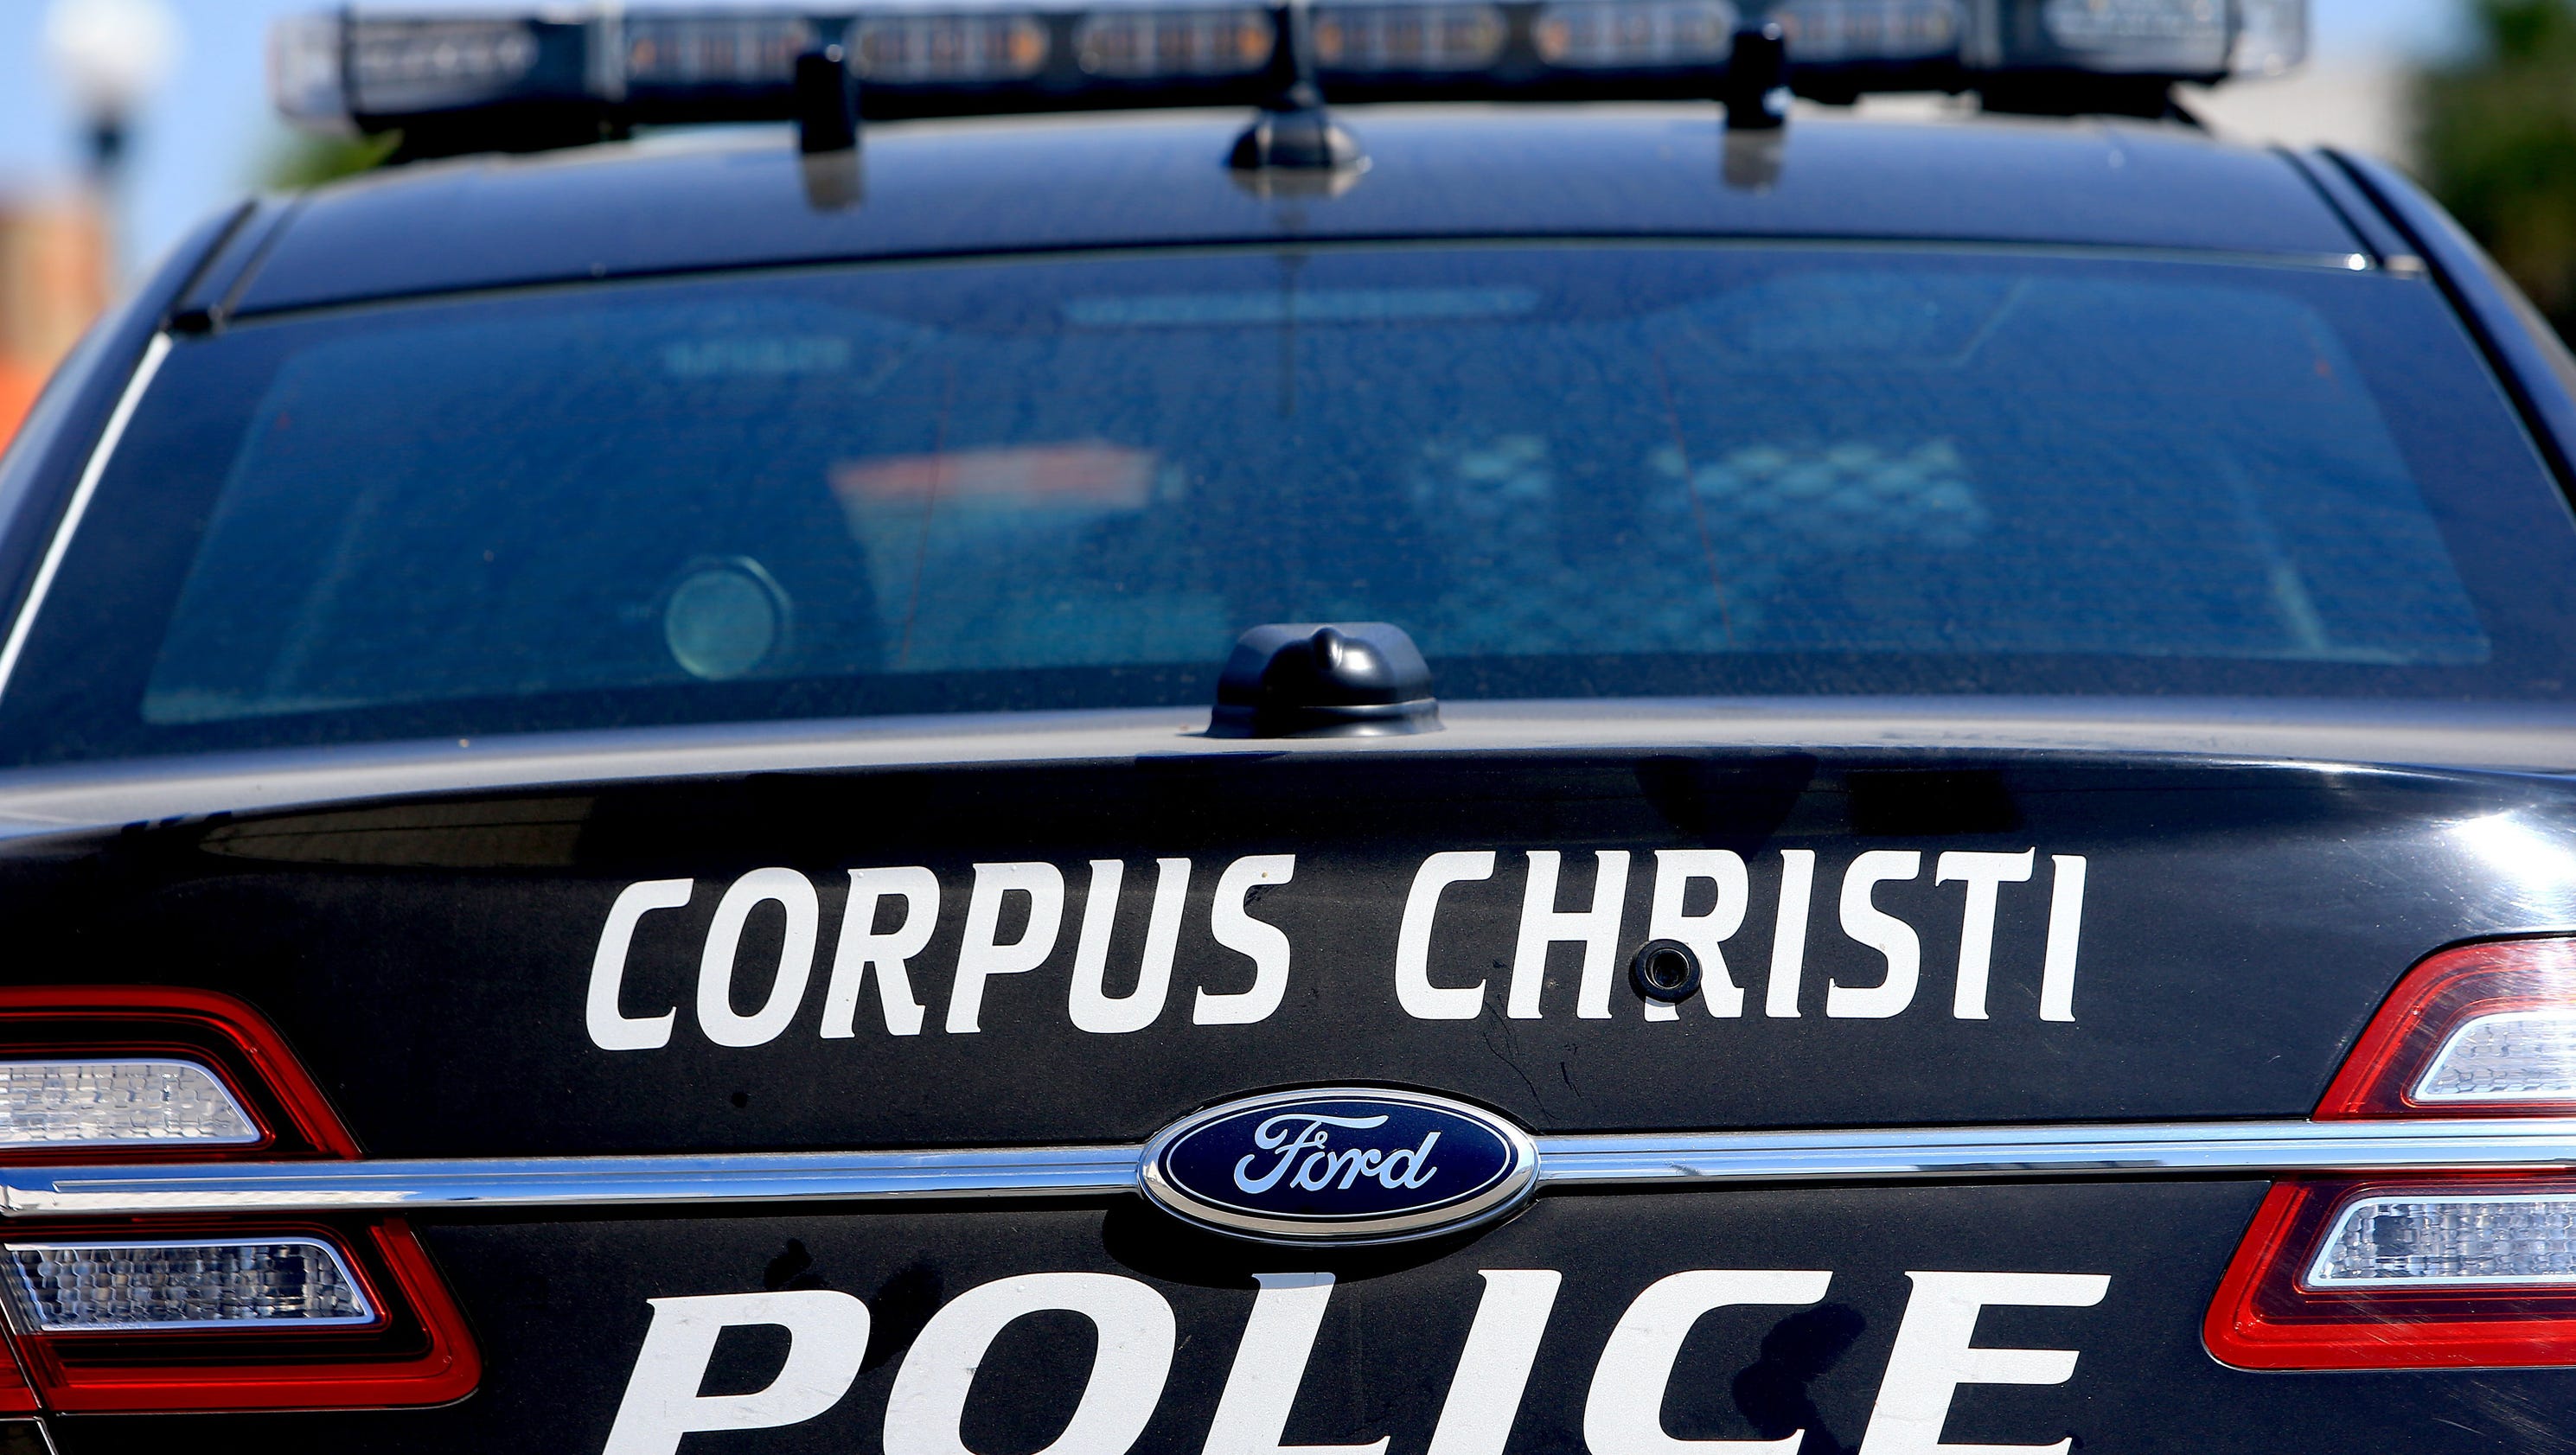 Corpus Christi man stabbed, robbed of his valuables - Corpus Christi Caller-Times